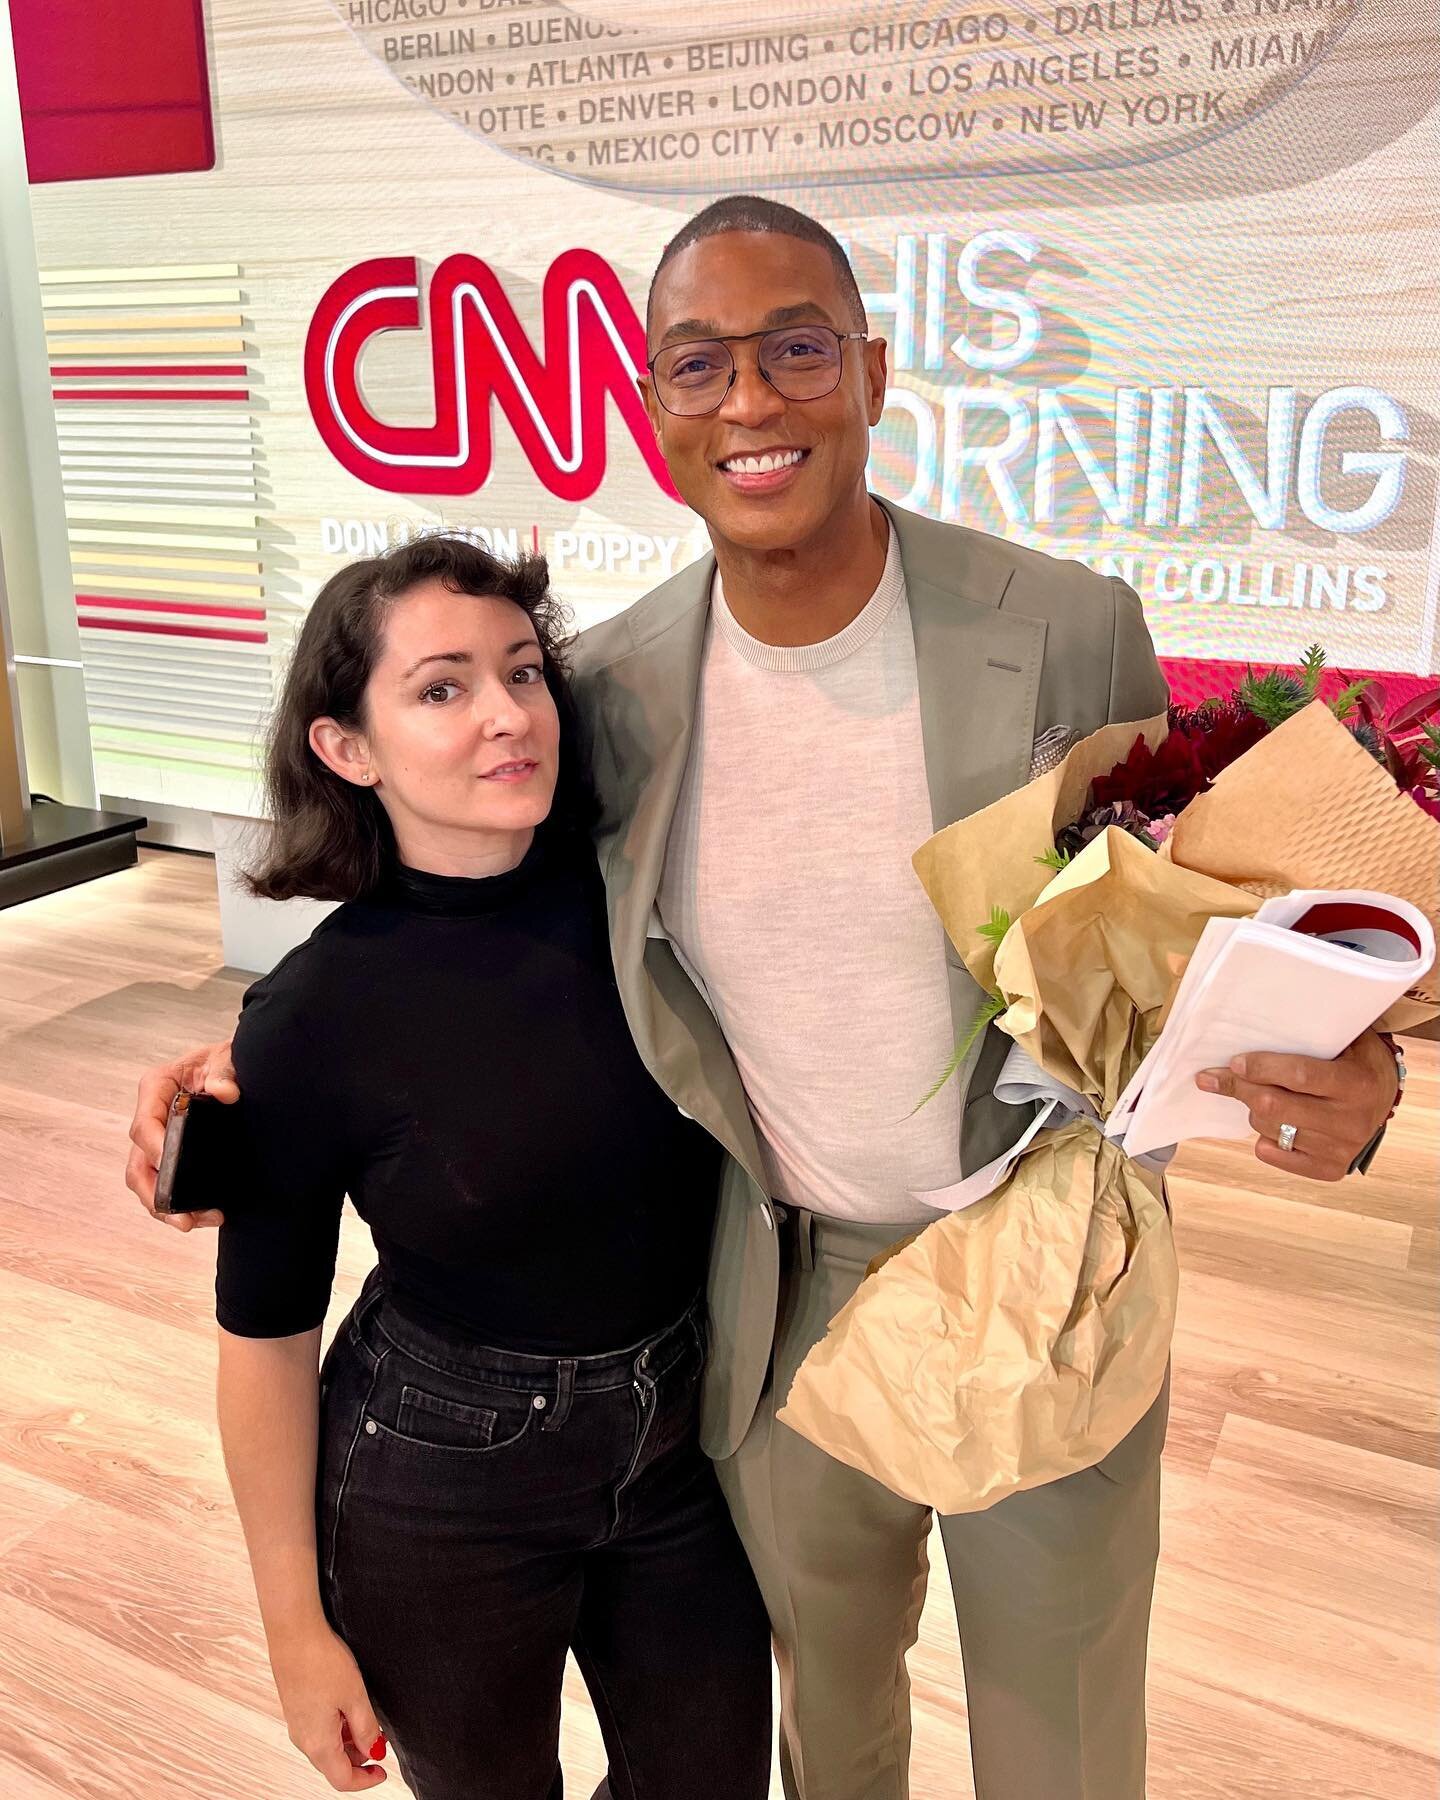 Congratulations on an amazing new show @donlemoncnn! Such a fun experience to be able to help you document day 1! #CNNThisMorning